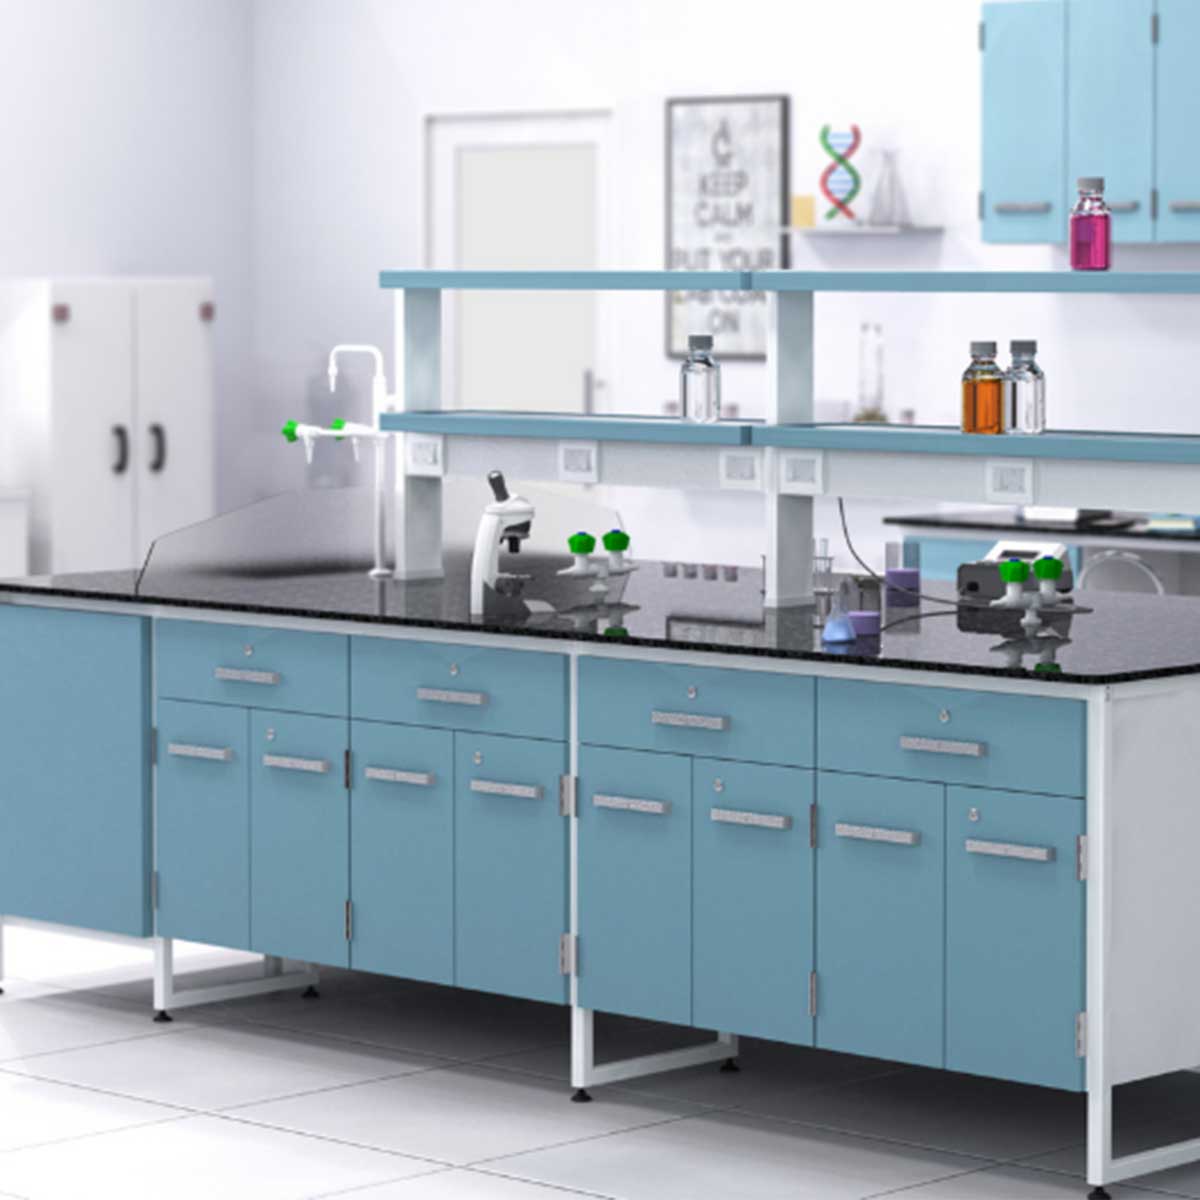 Laboratory Workstation Manufacturers, Suppliers in Rohini Sector 23